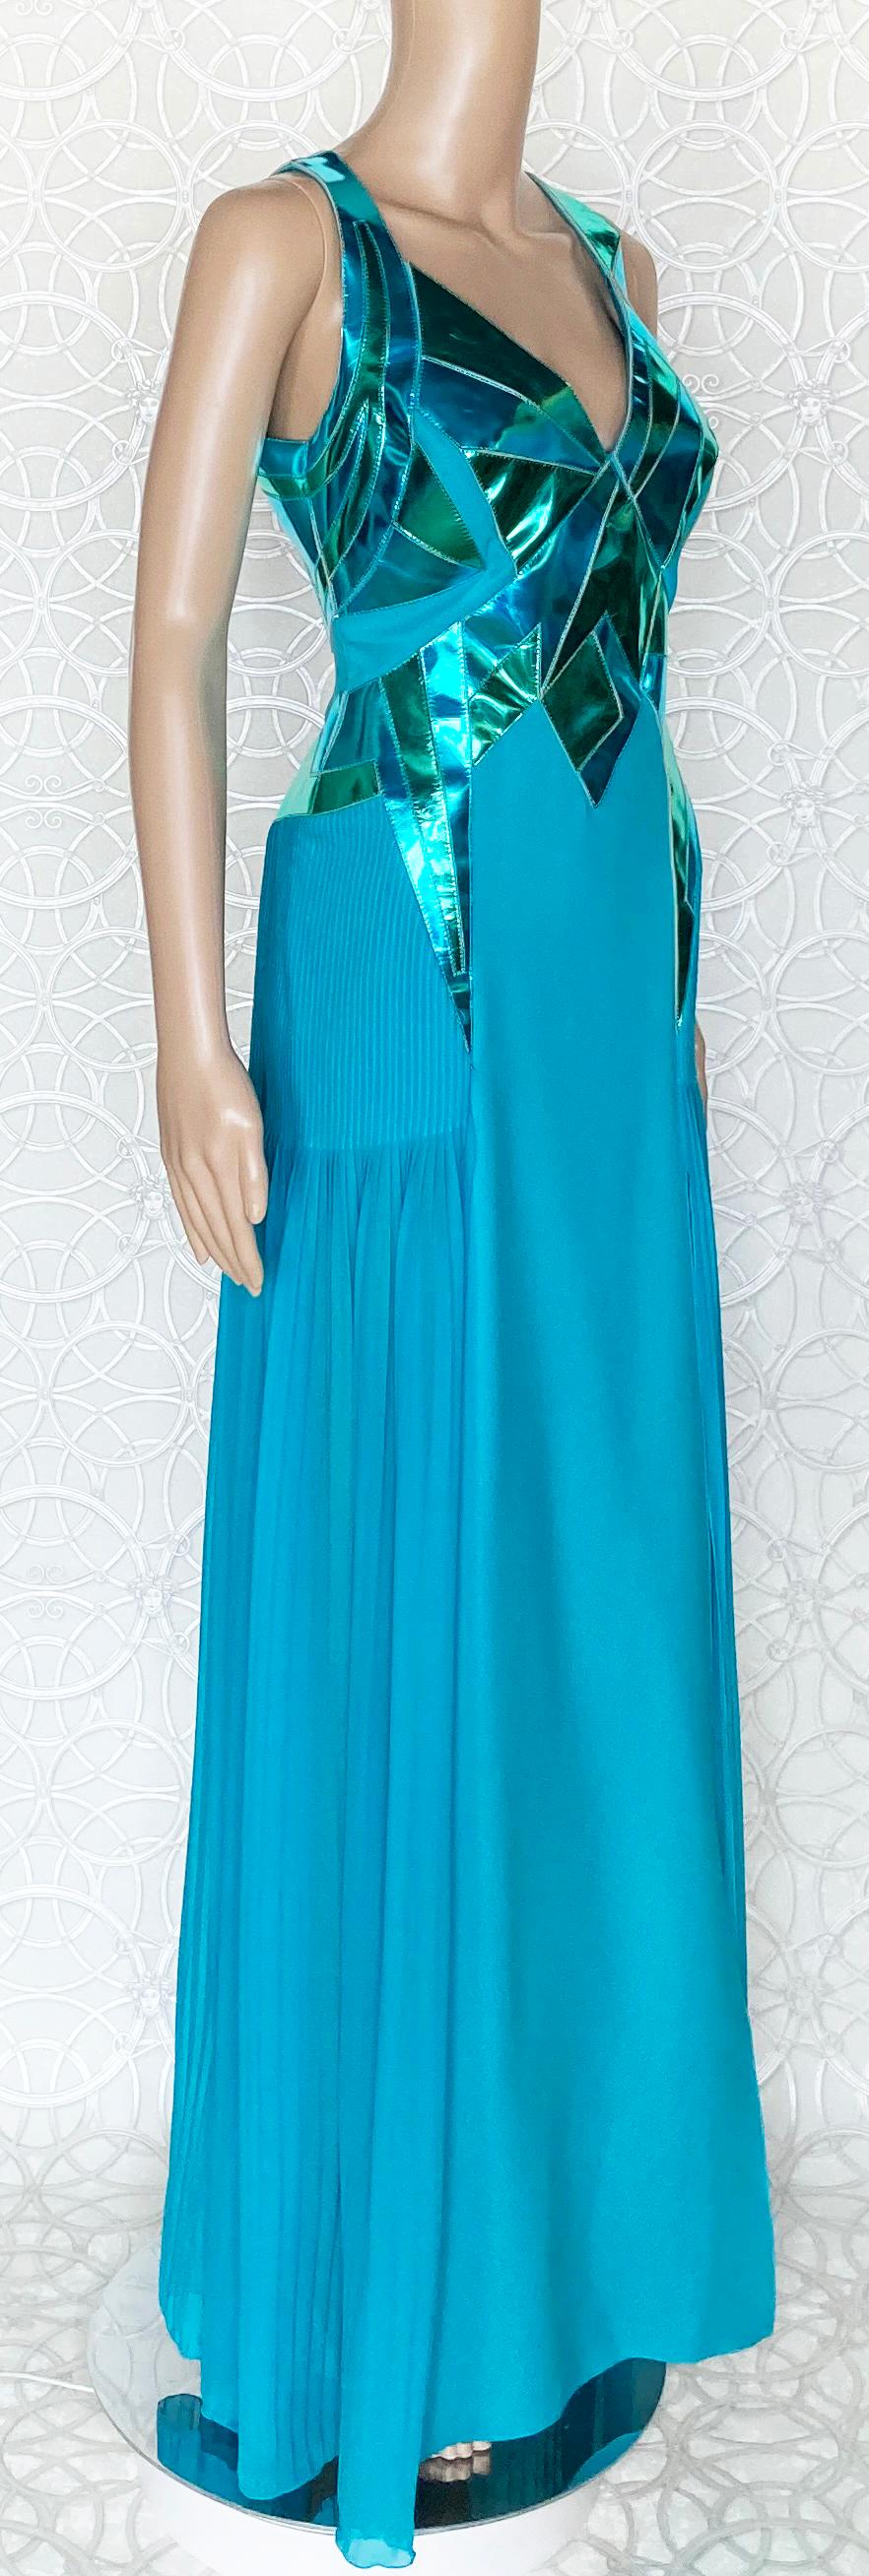 Women's or Men's F/W 2010 Look # 38 VERSACE EMBELLISHED GOWN DRESS in BLUE 44 - 8 For Sale